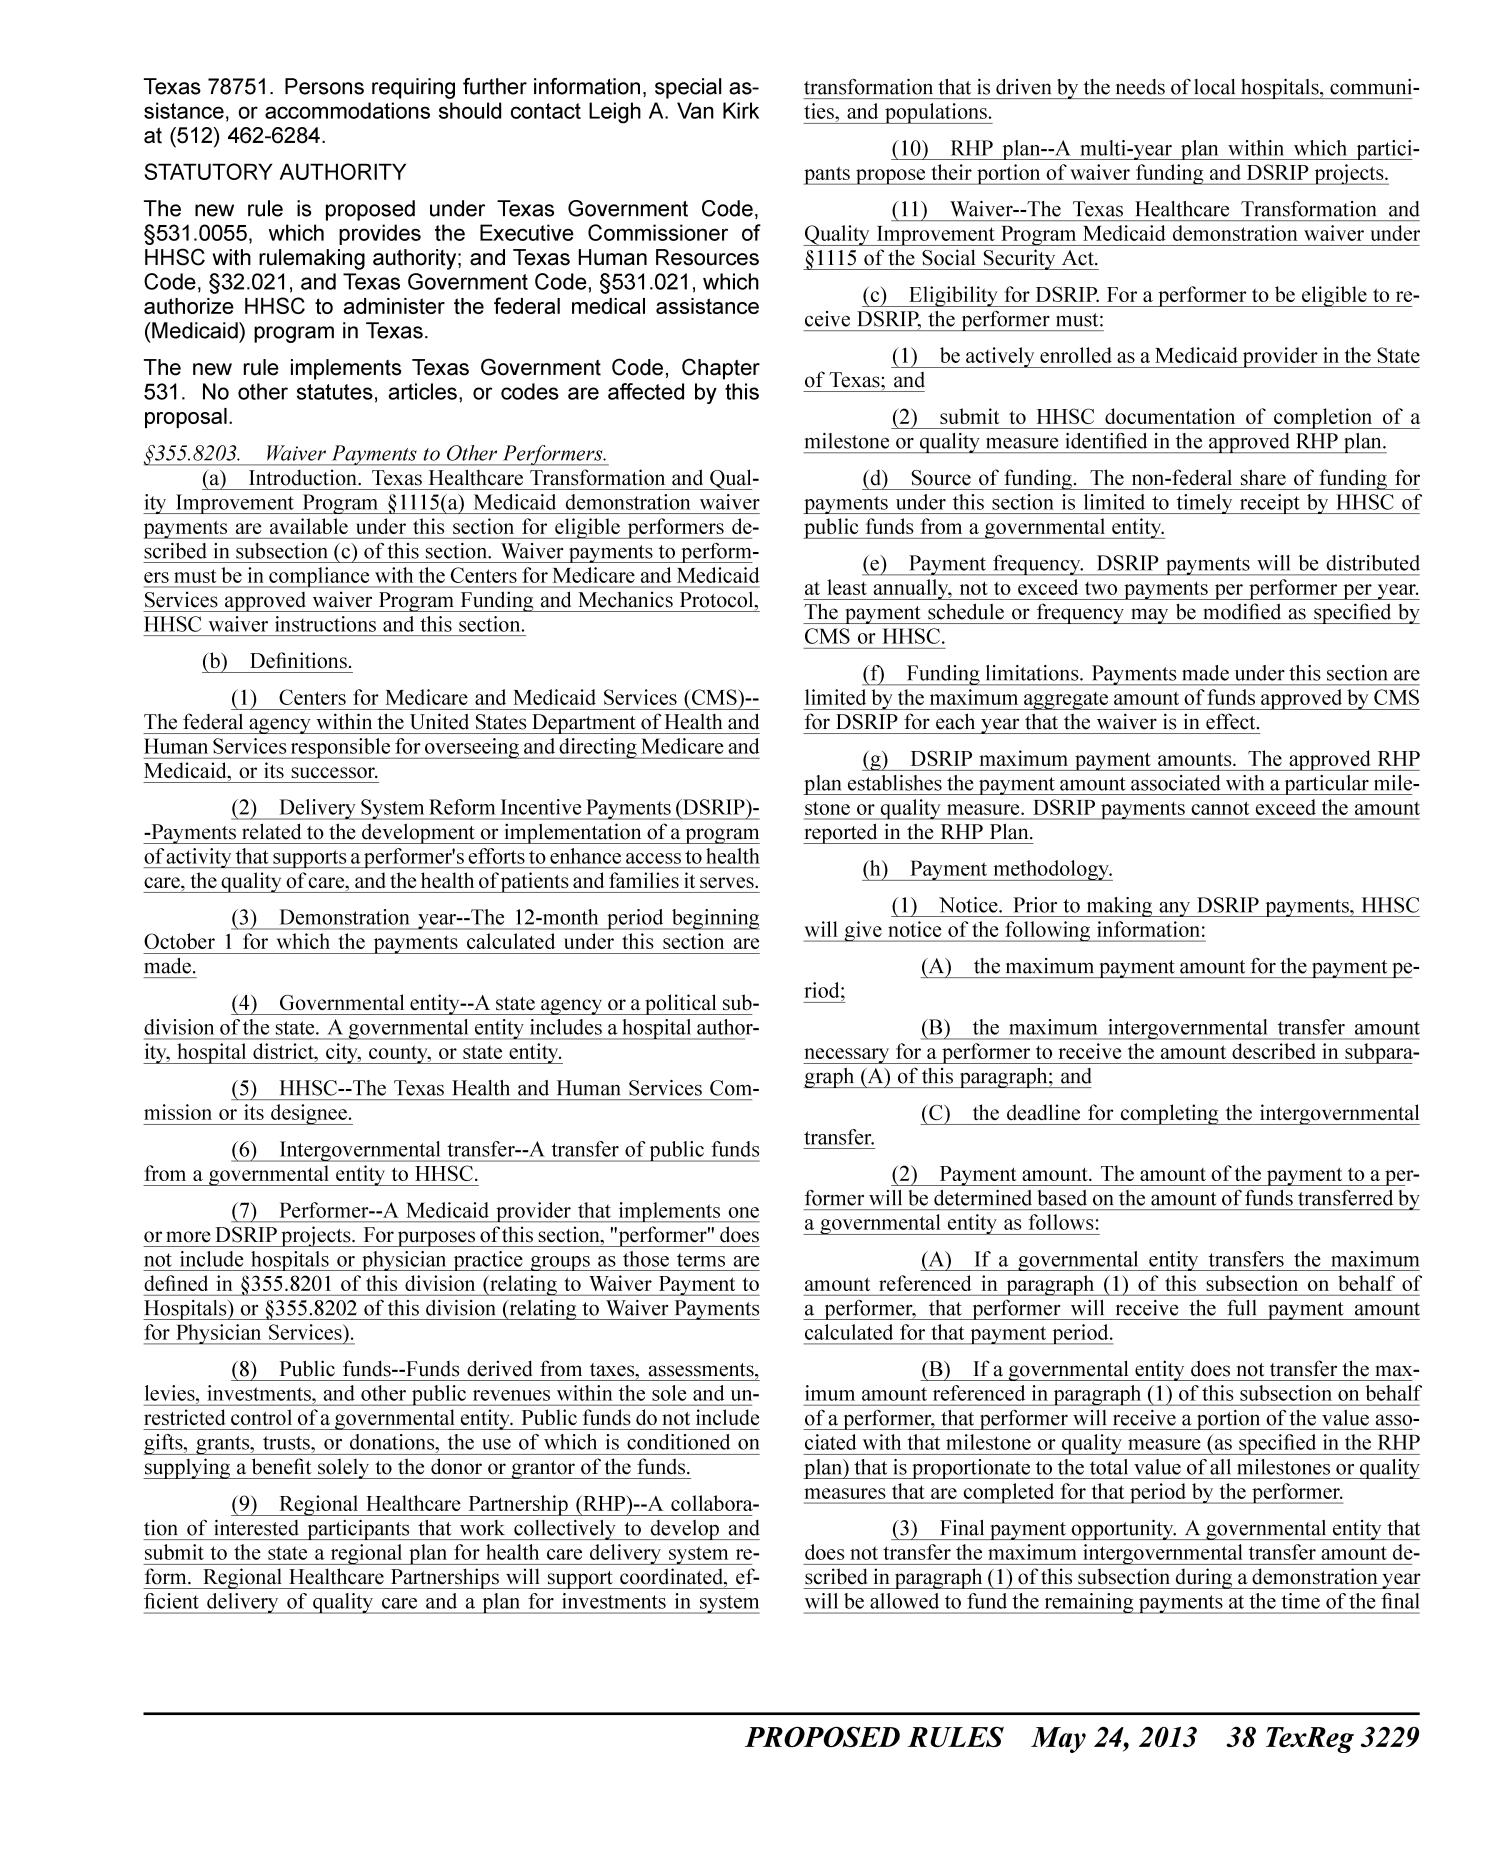 Texas Register, Volume 38, Number 21, Pages 3215-3396, May 24, 2013
                                                
                                                    3229
                                                